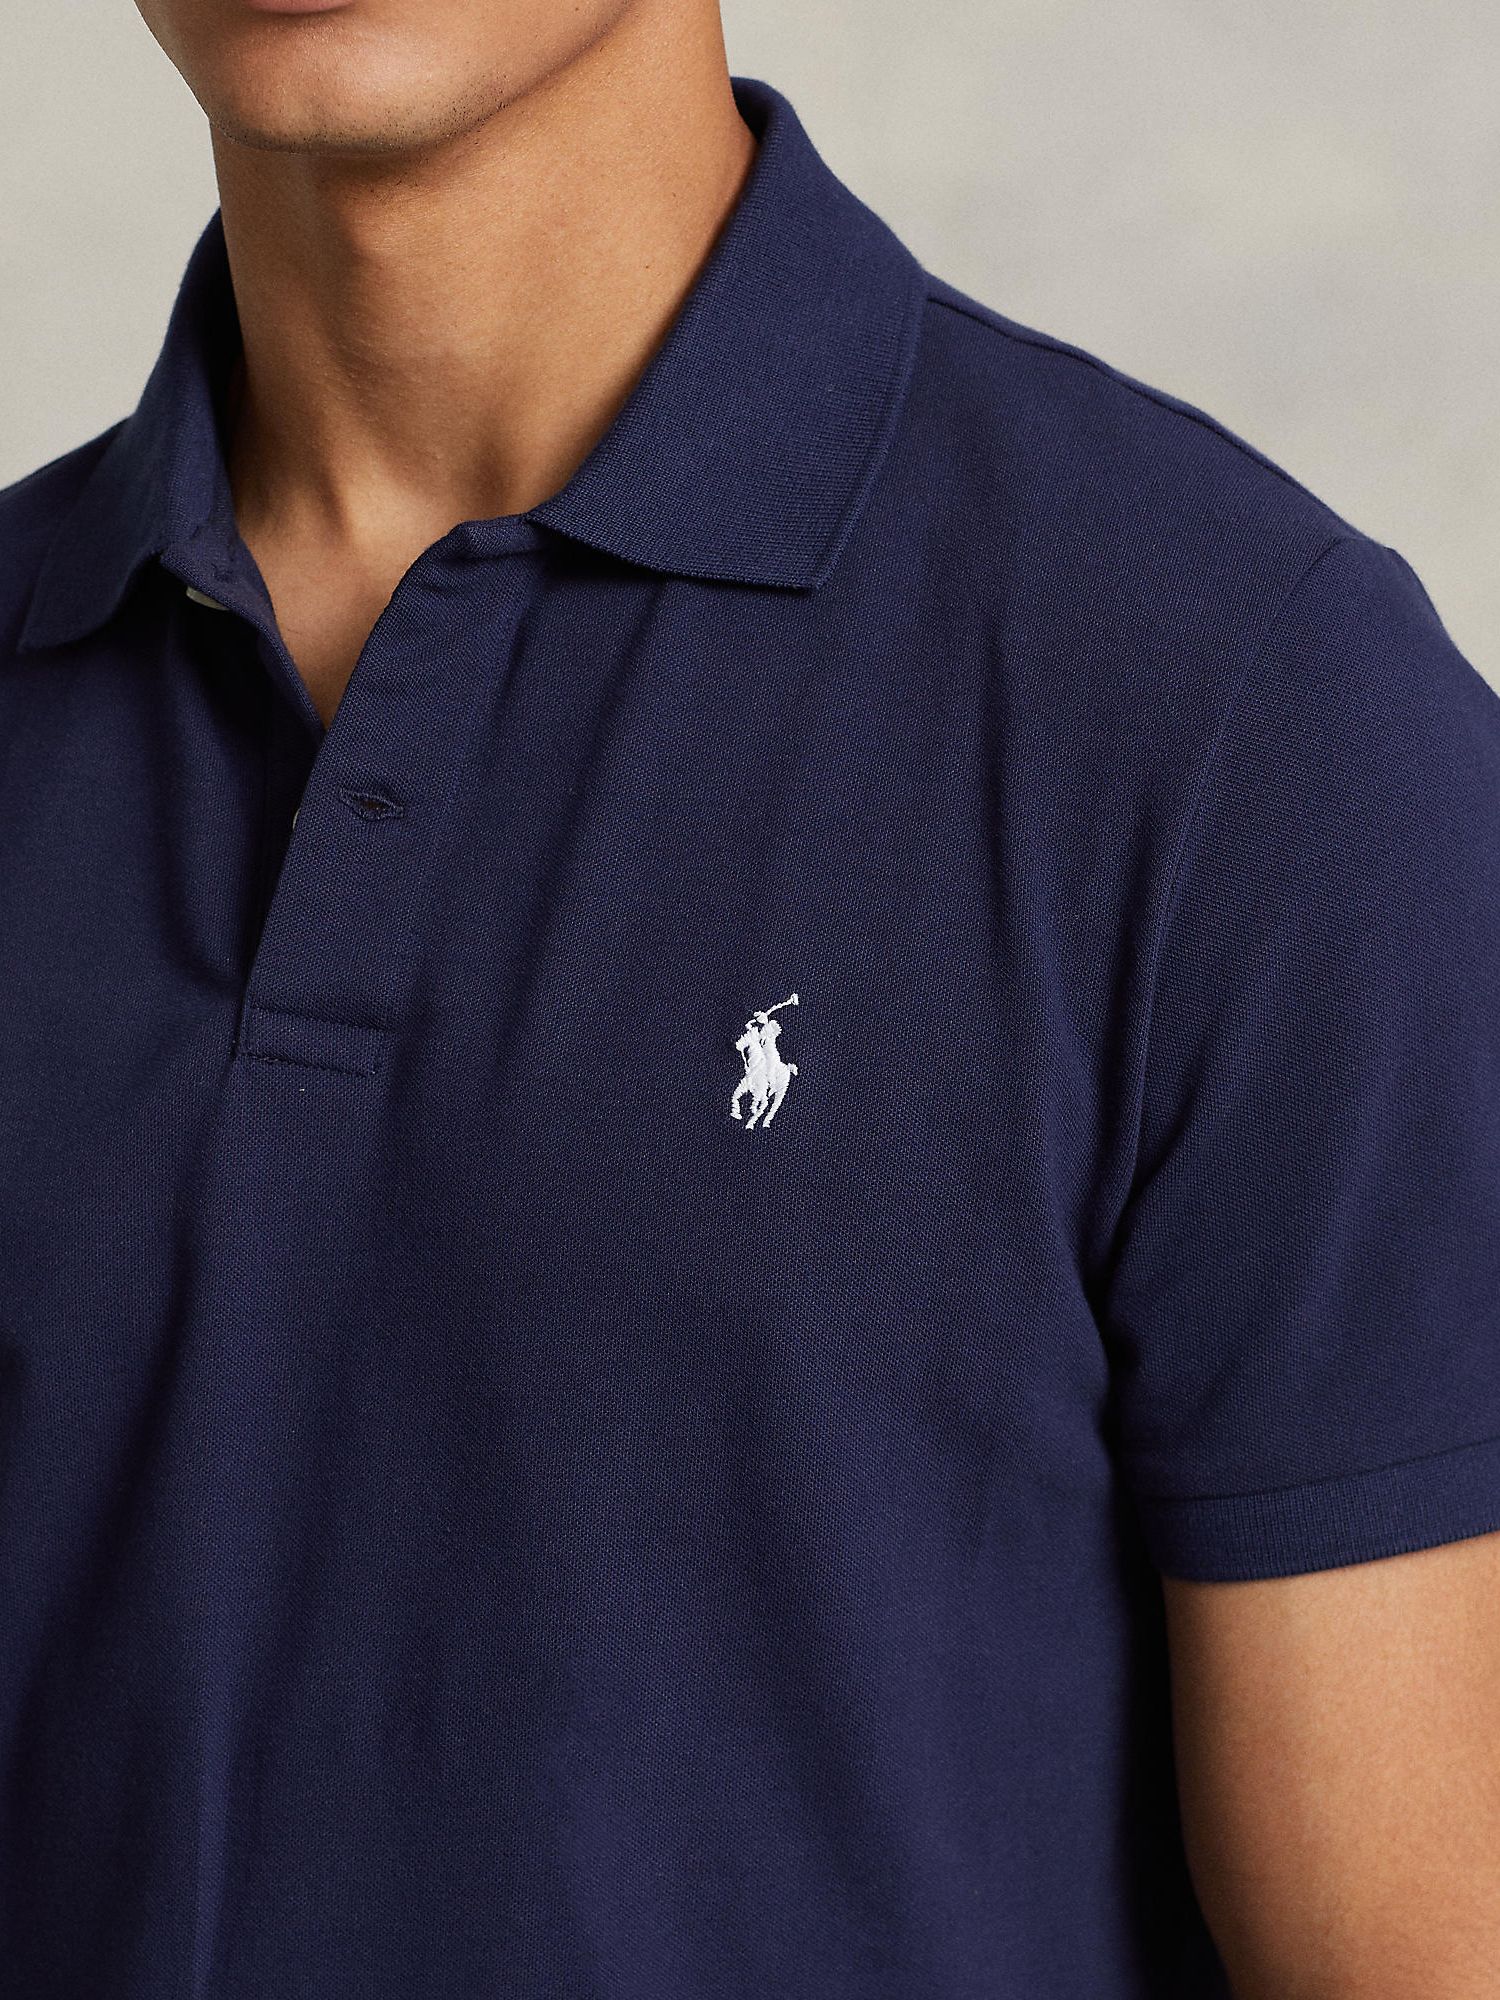 Navy Blue And Red Slim-Fit Pique Polo Shirt RALPH LAUREN, 53% OFF